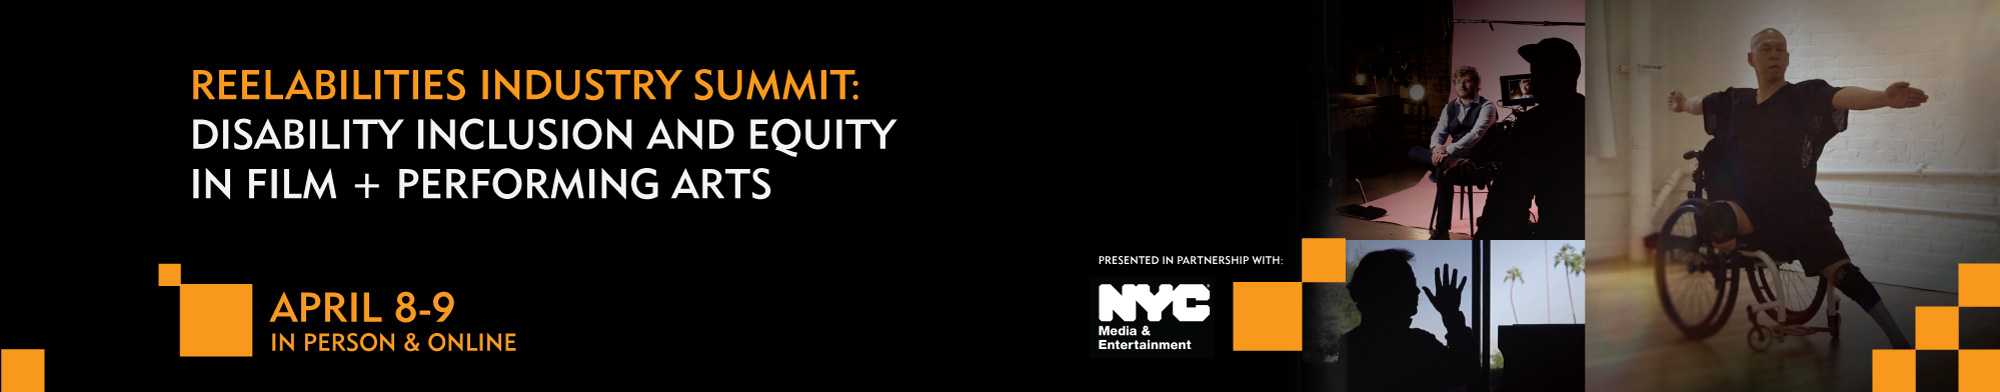 Reelabilities industry summit: disability inclusion and equity in film + performing arts April 8-9, 2024 in-person and online presented in partnership with NYC Mayor office for media and entertainment